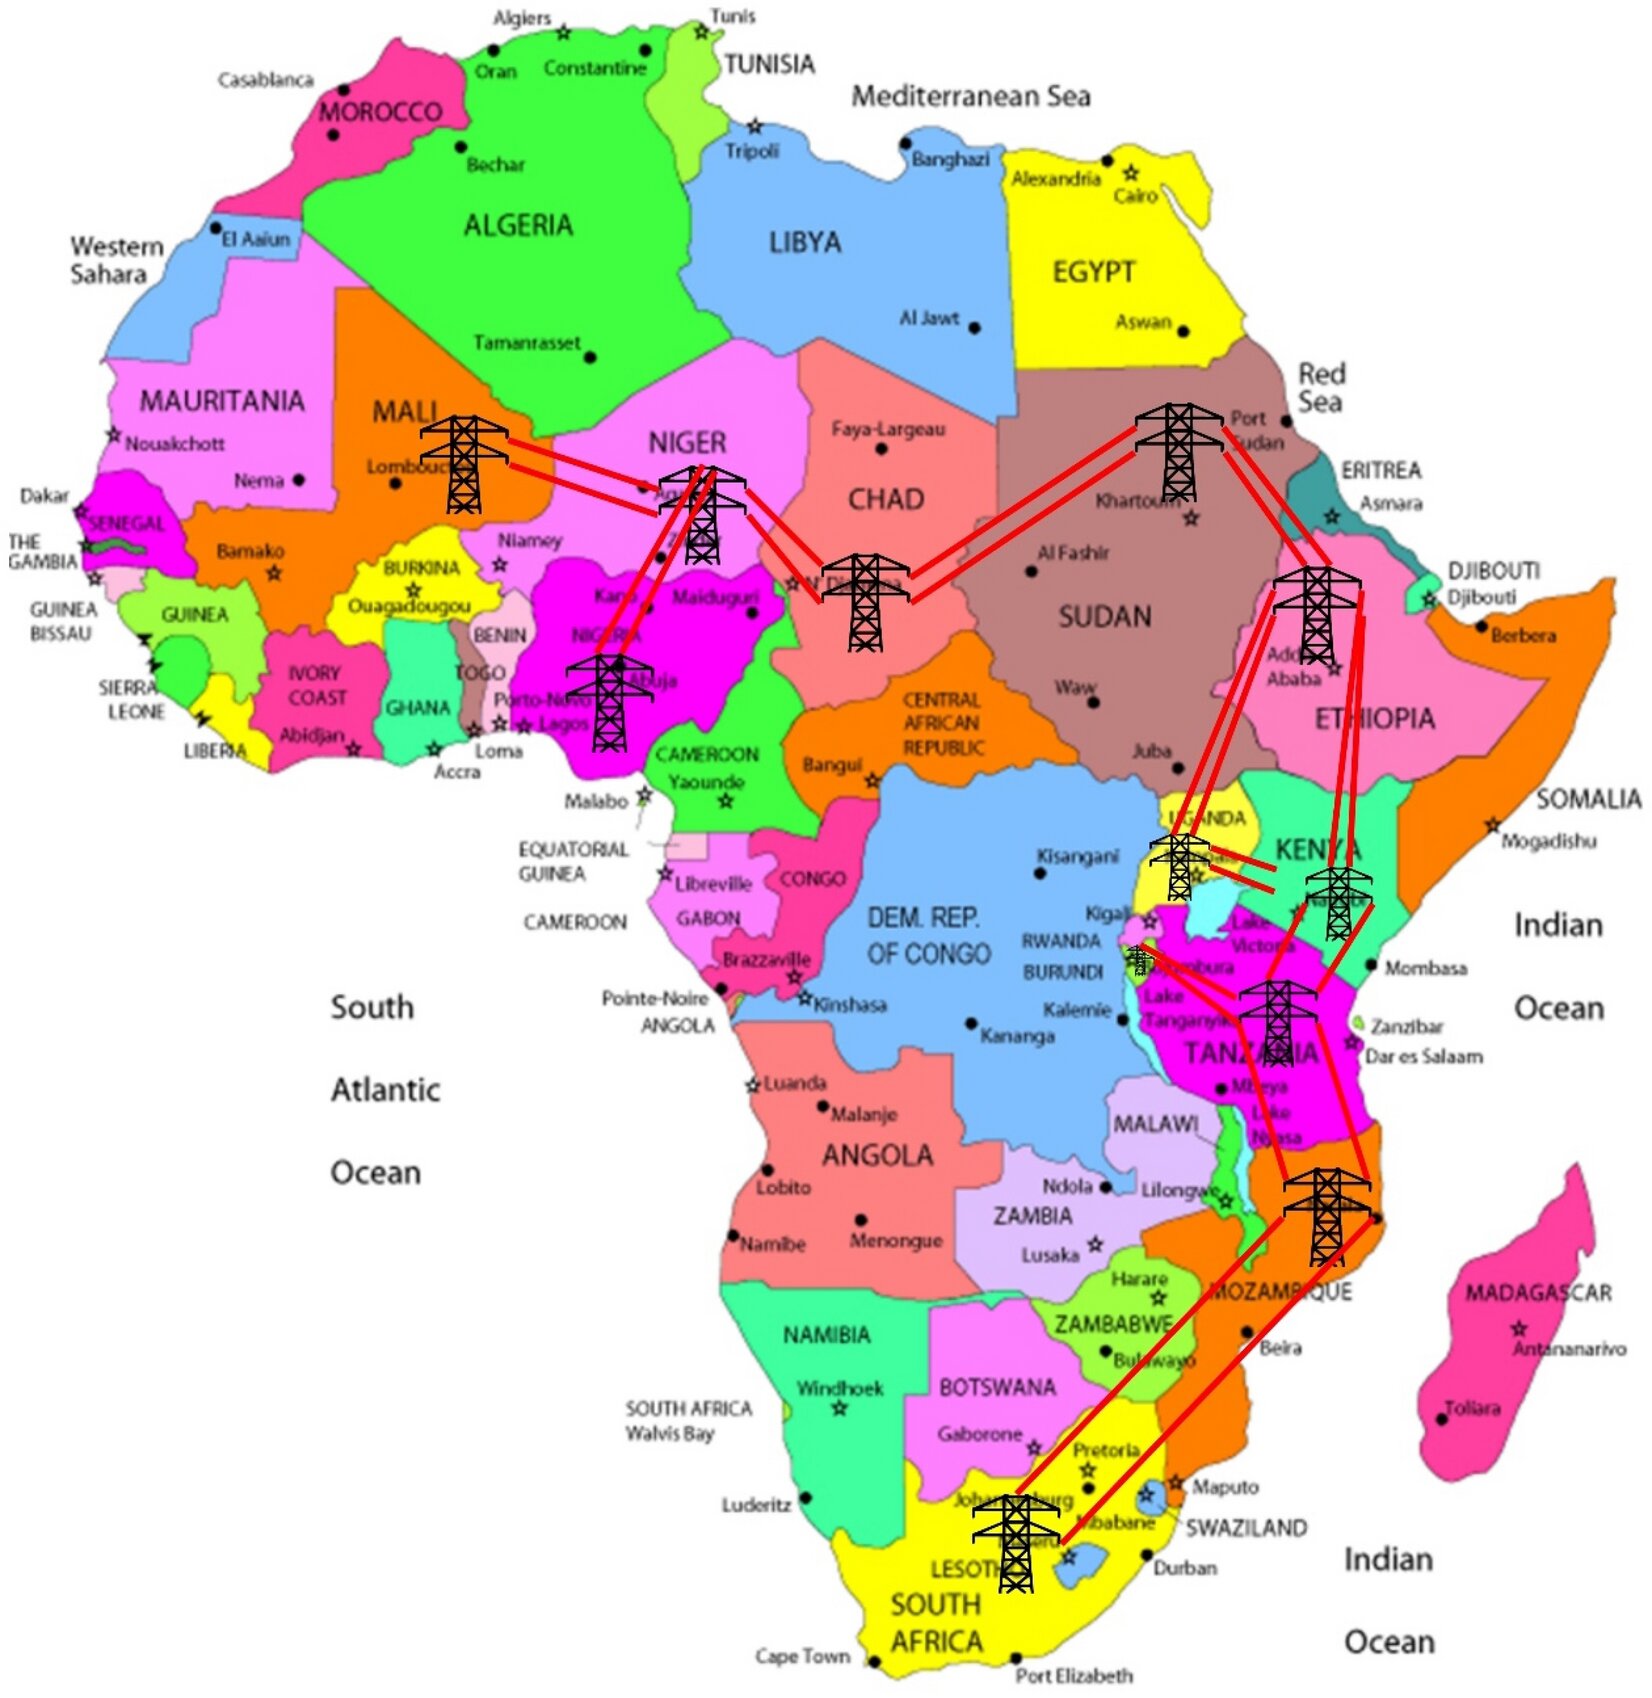 A proposal to build a sub-Saharan Africa electrical grid across 12 countries